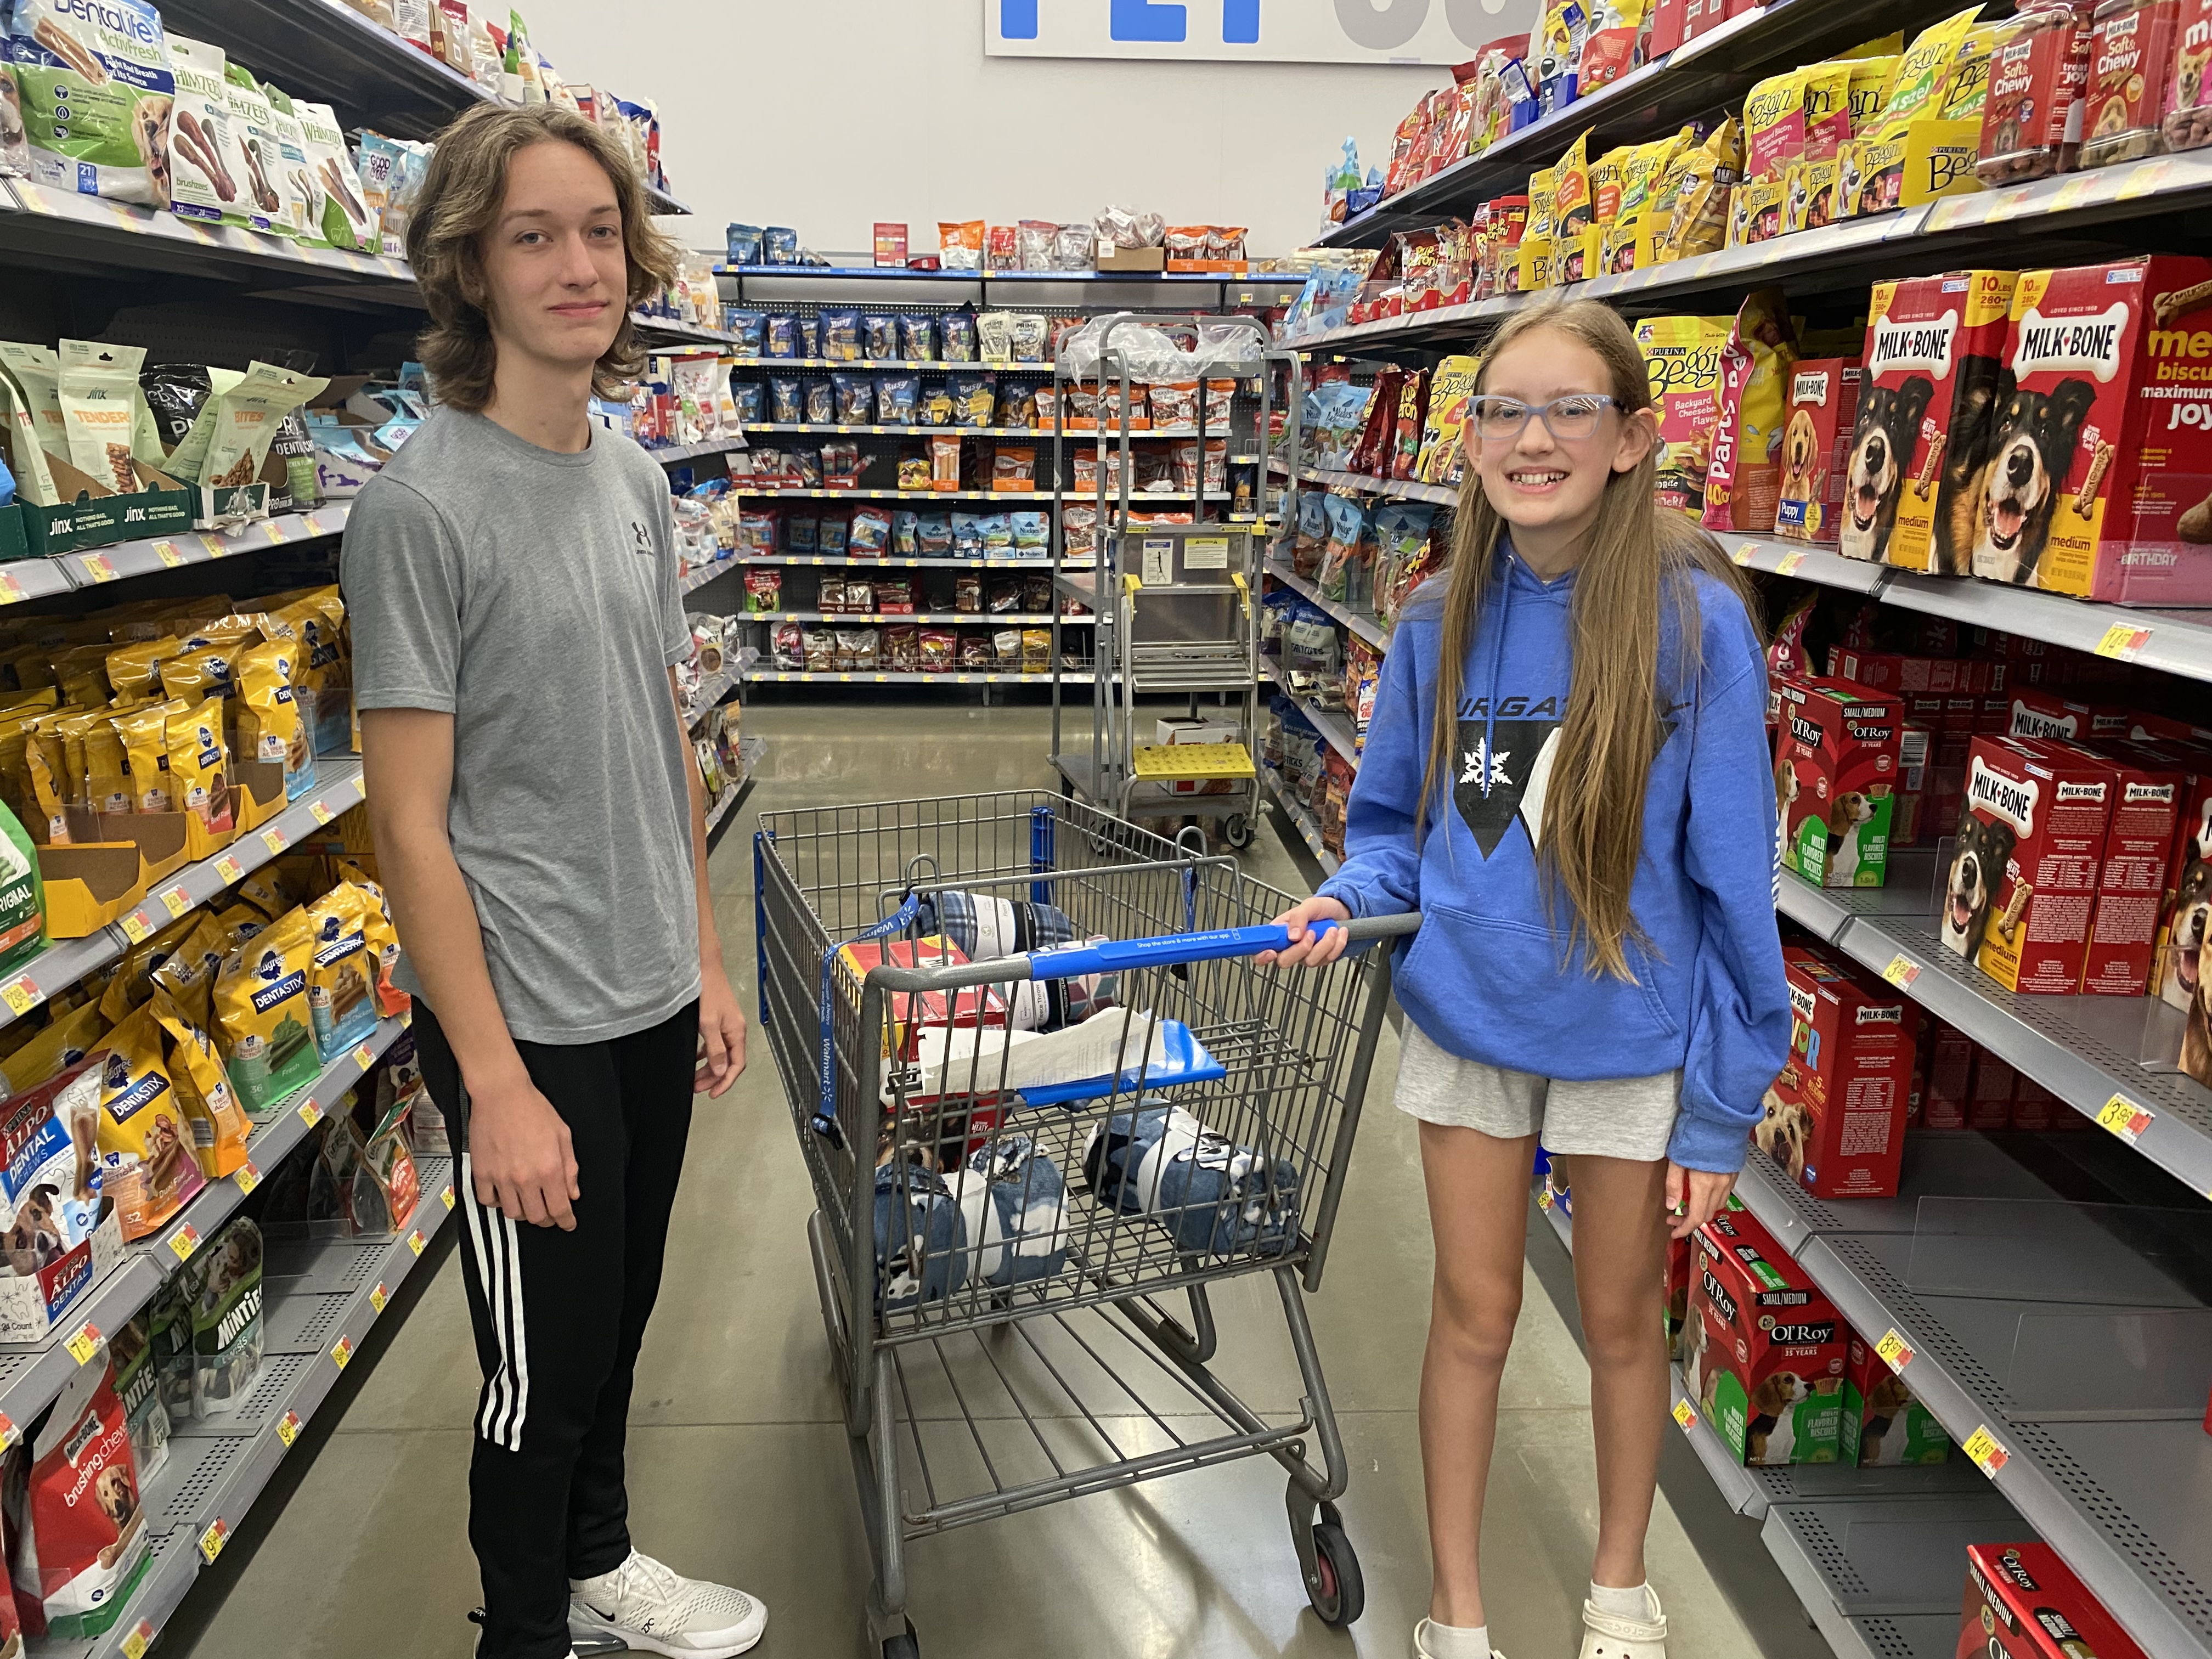 Lane and Brooke Hayes pose on pet aisle at store.